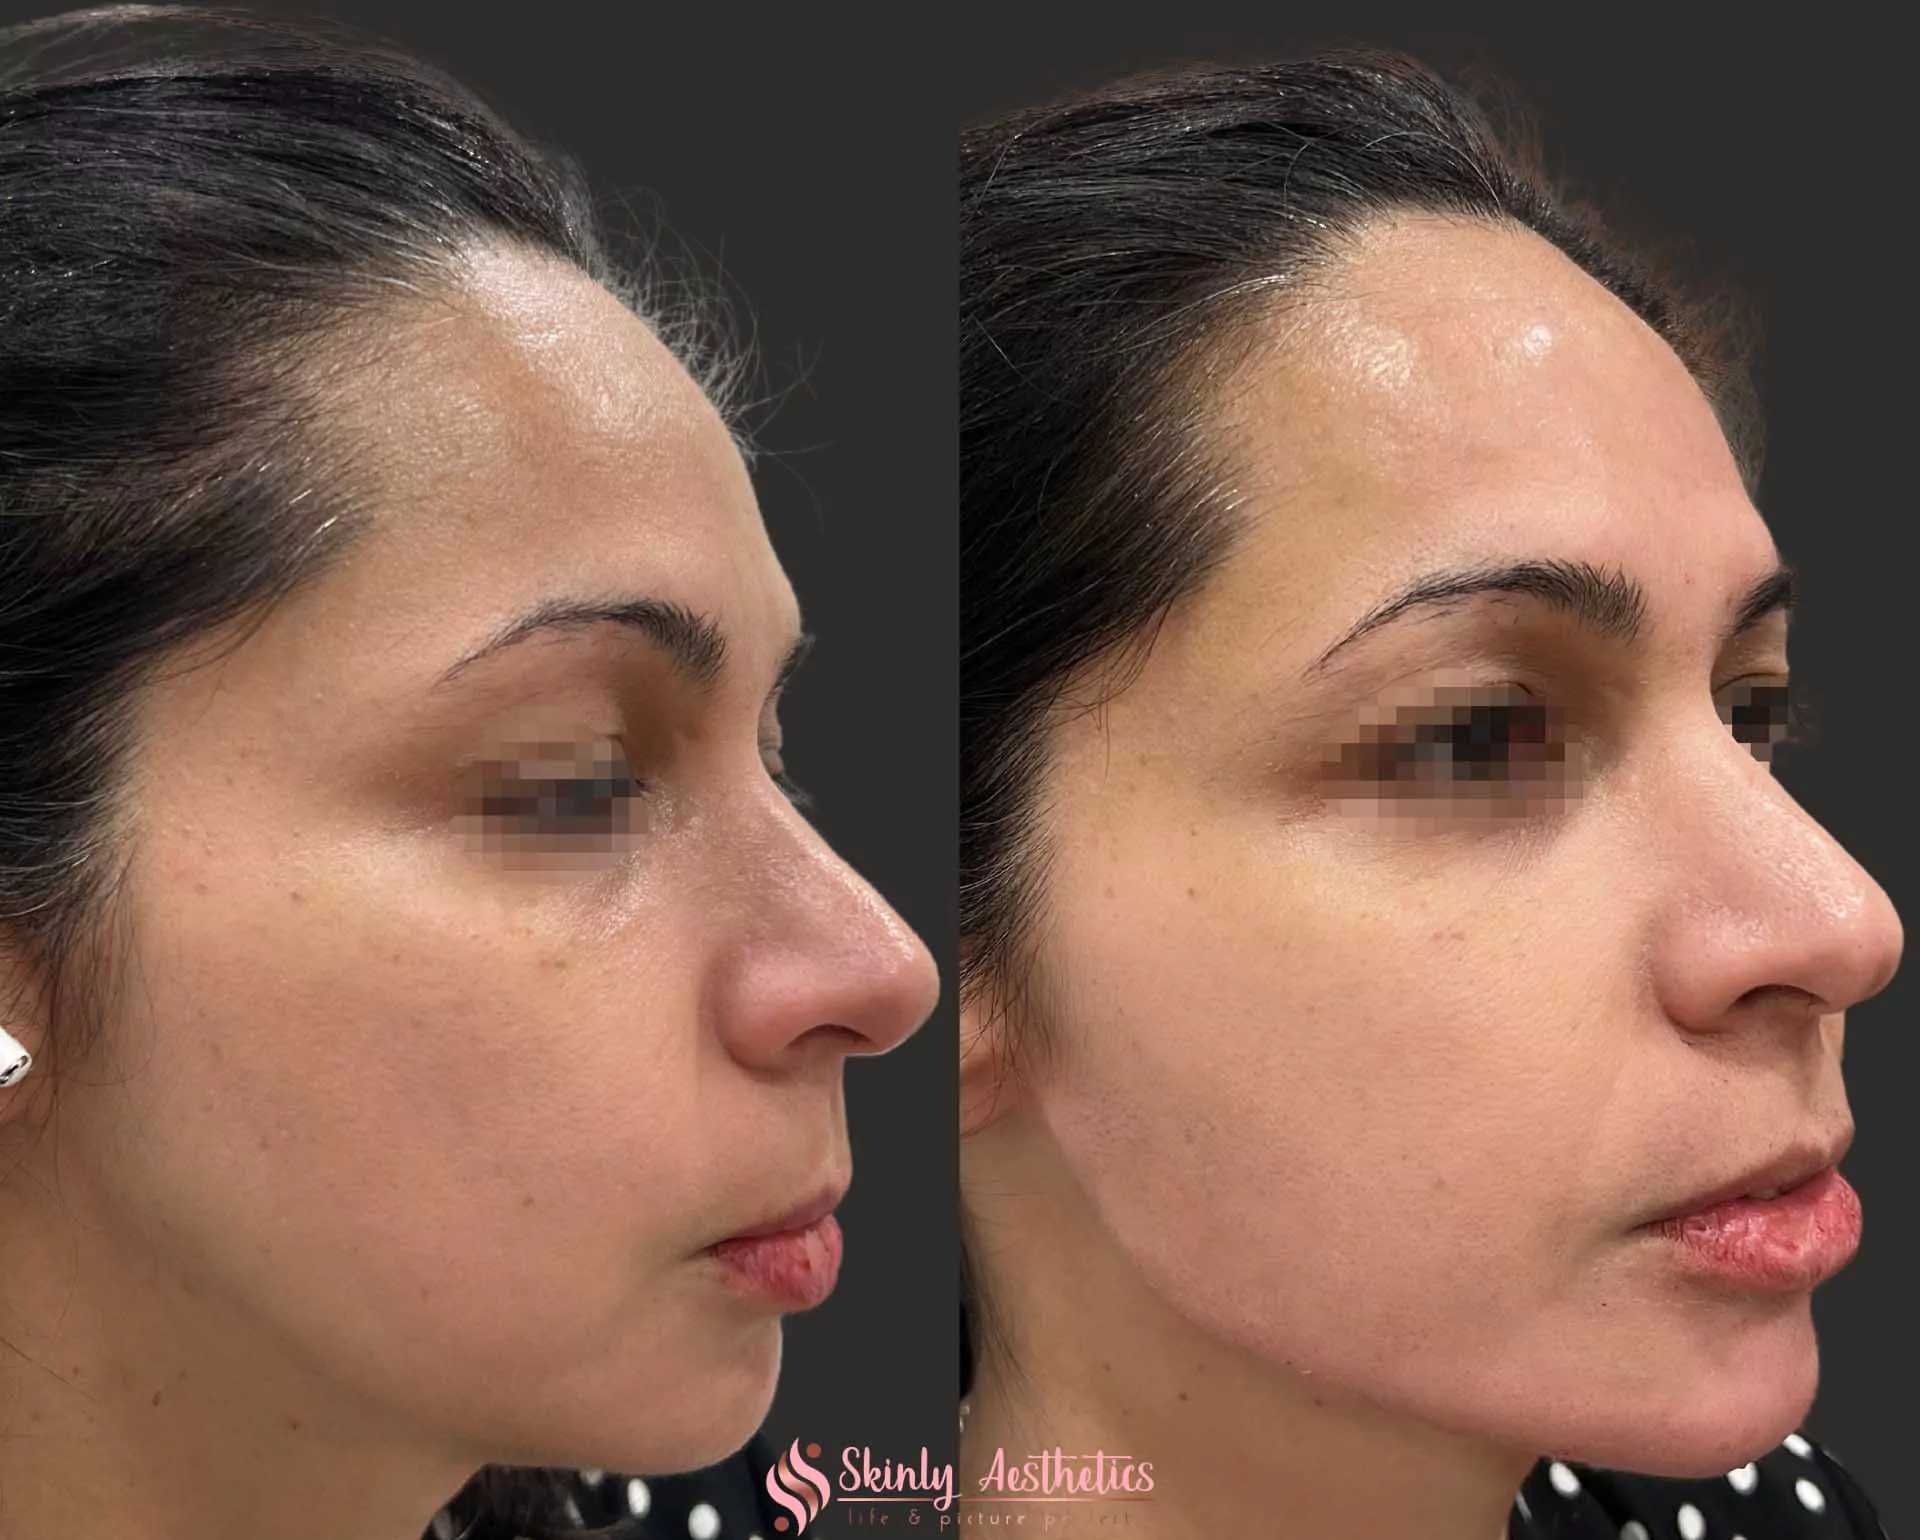 jawline sculpting and definition with Radiesse filler